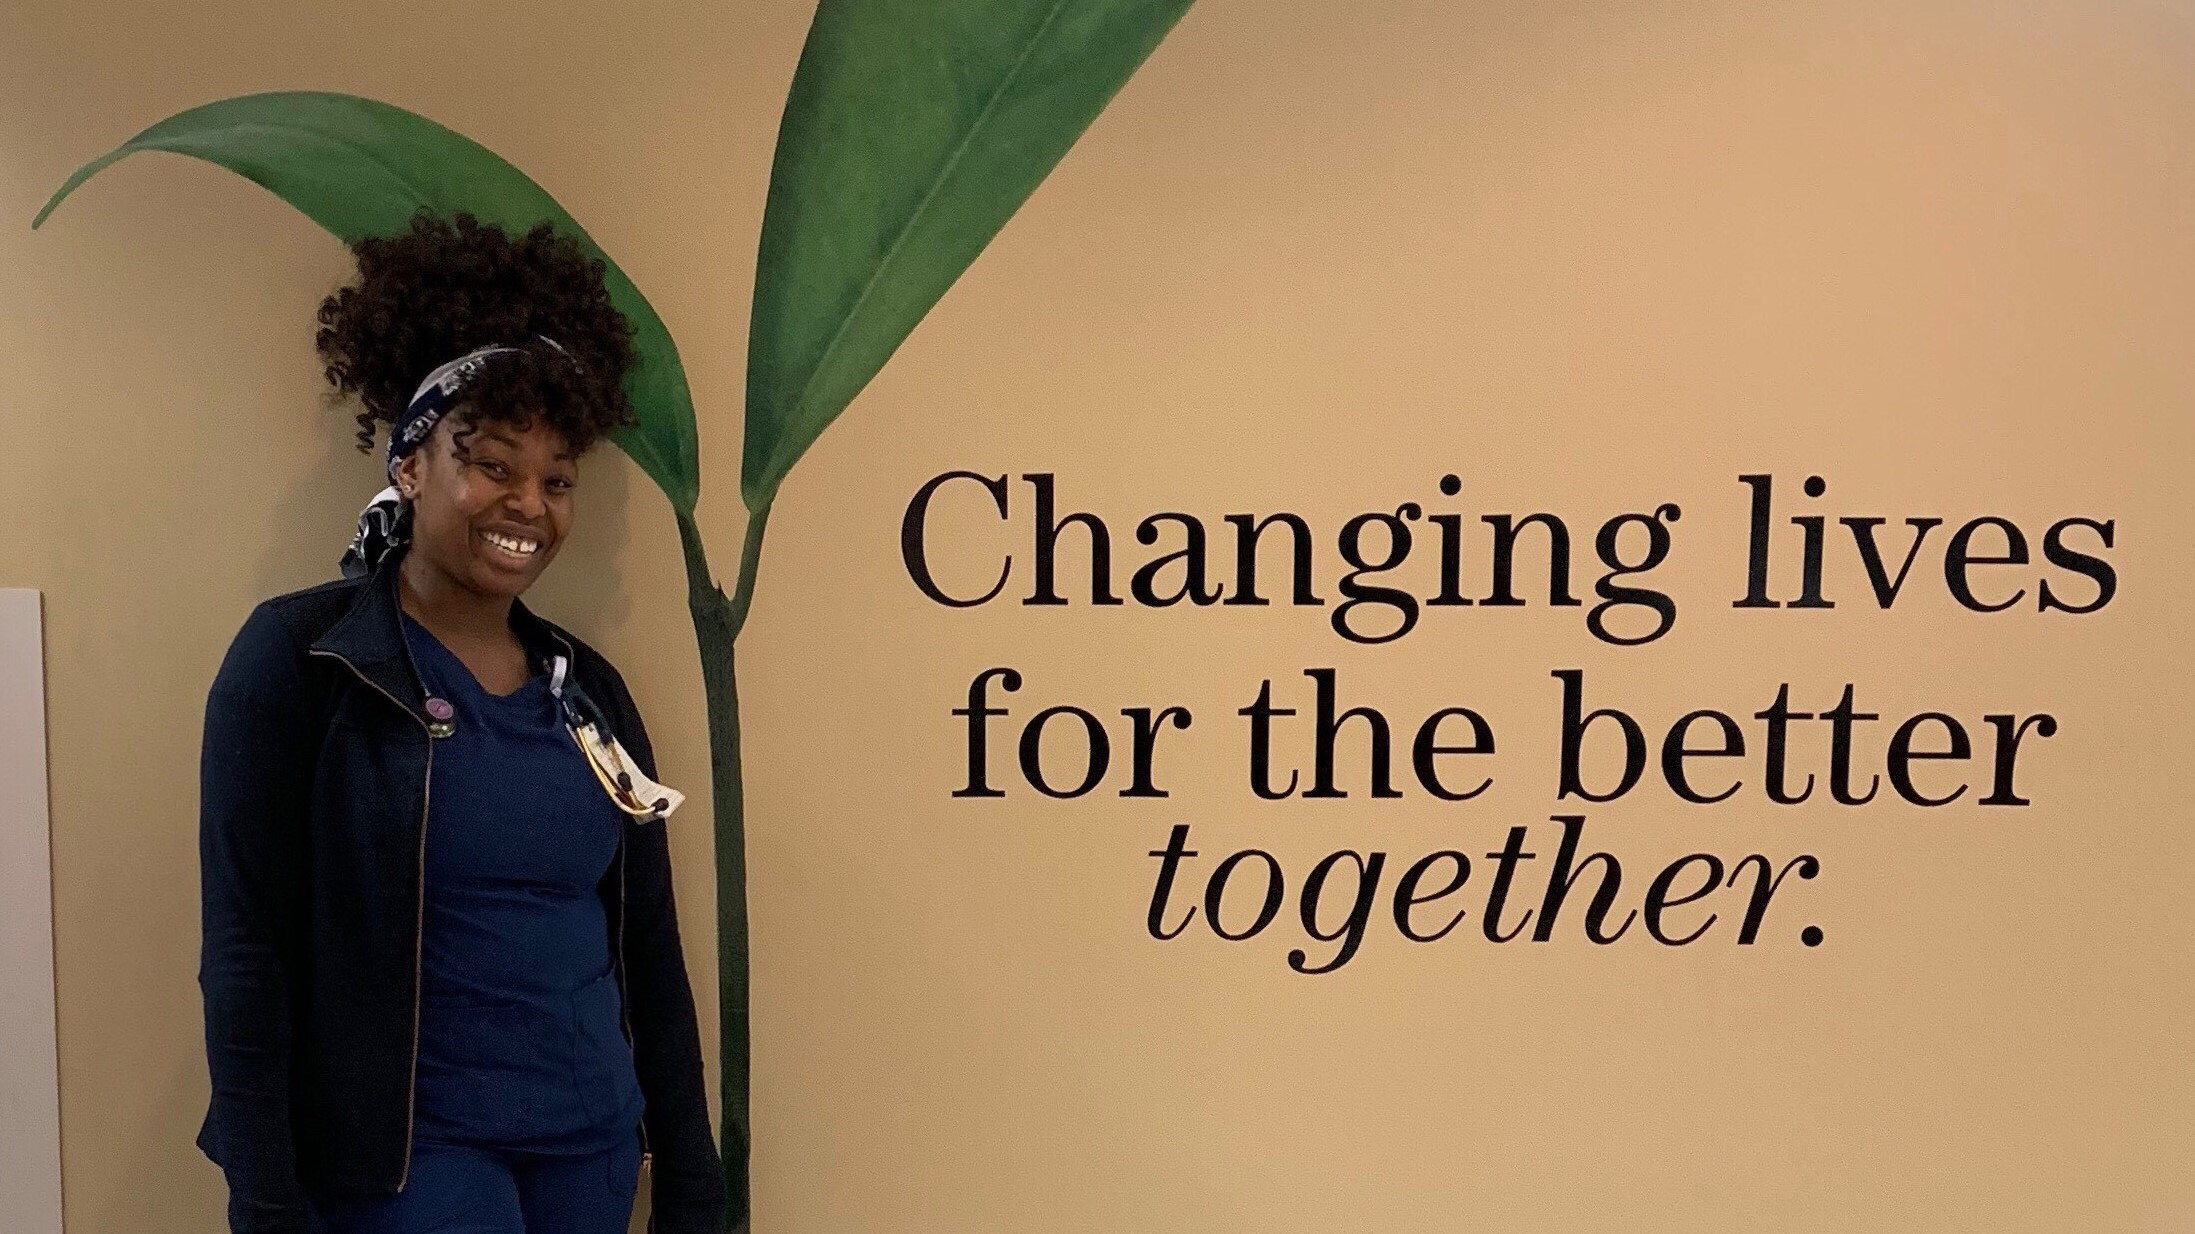 Image of a woman standing next to a large plant, with the caption "Changing Lives for the better together."